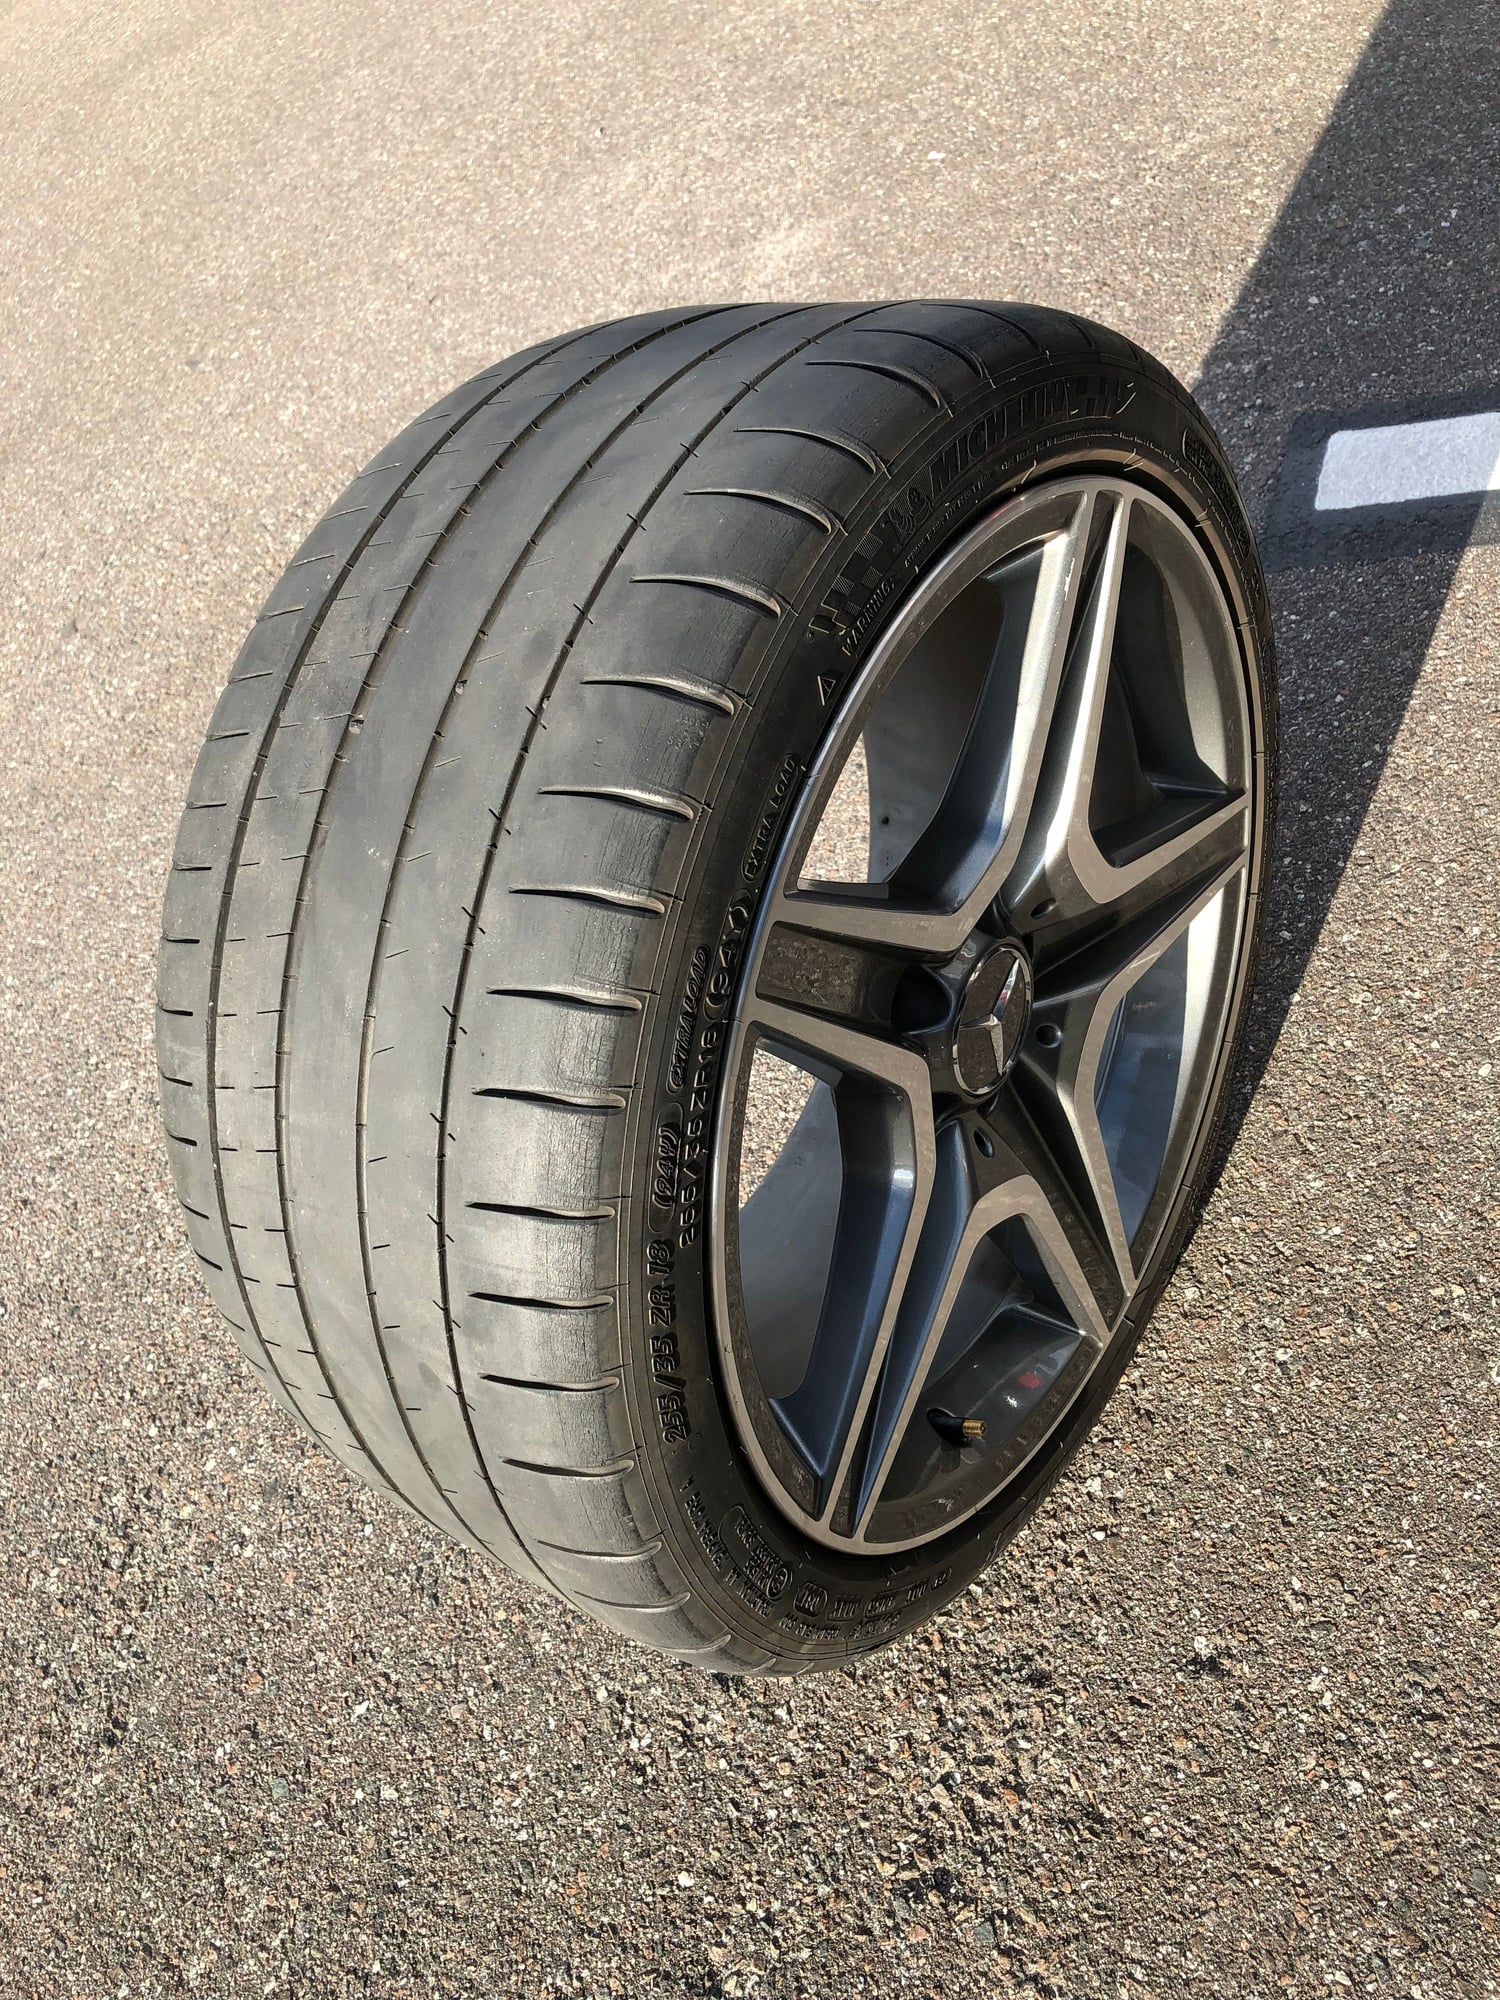 Wheels and Tires/Axles - OEM 18" C63 Wheels for sale - Used - 2008 to 2015 Mercedes-Benz C63 AMG - Altamonte Springs, FL 32714, United States